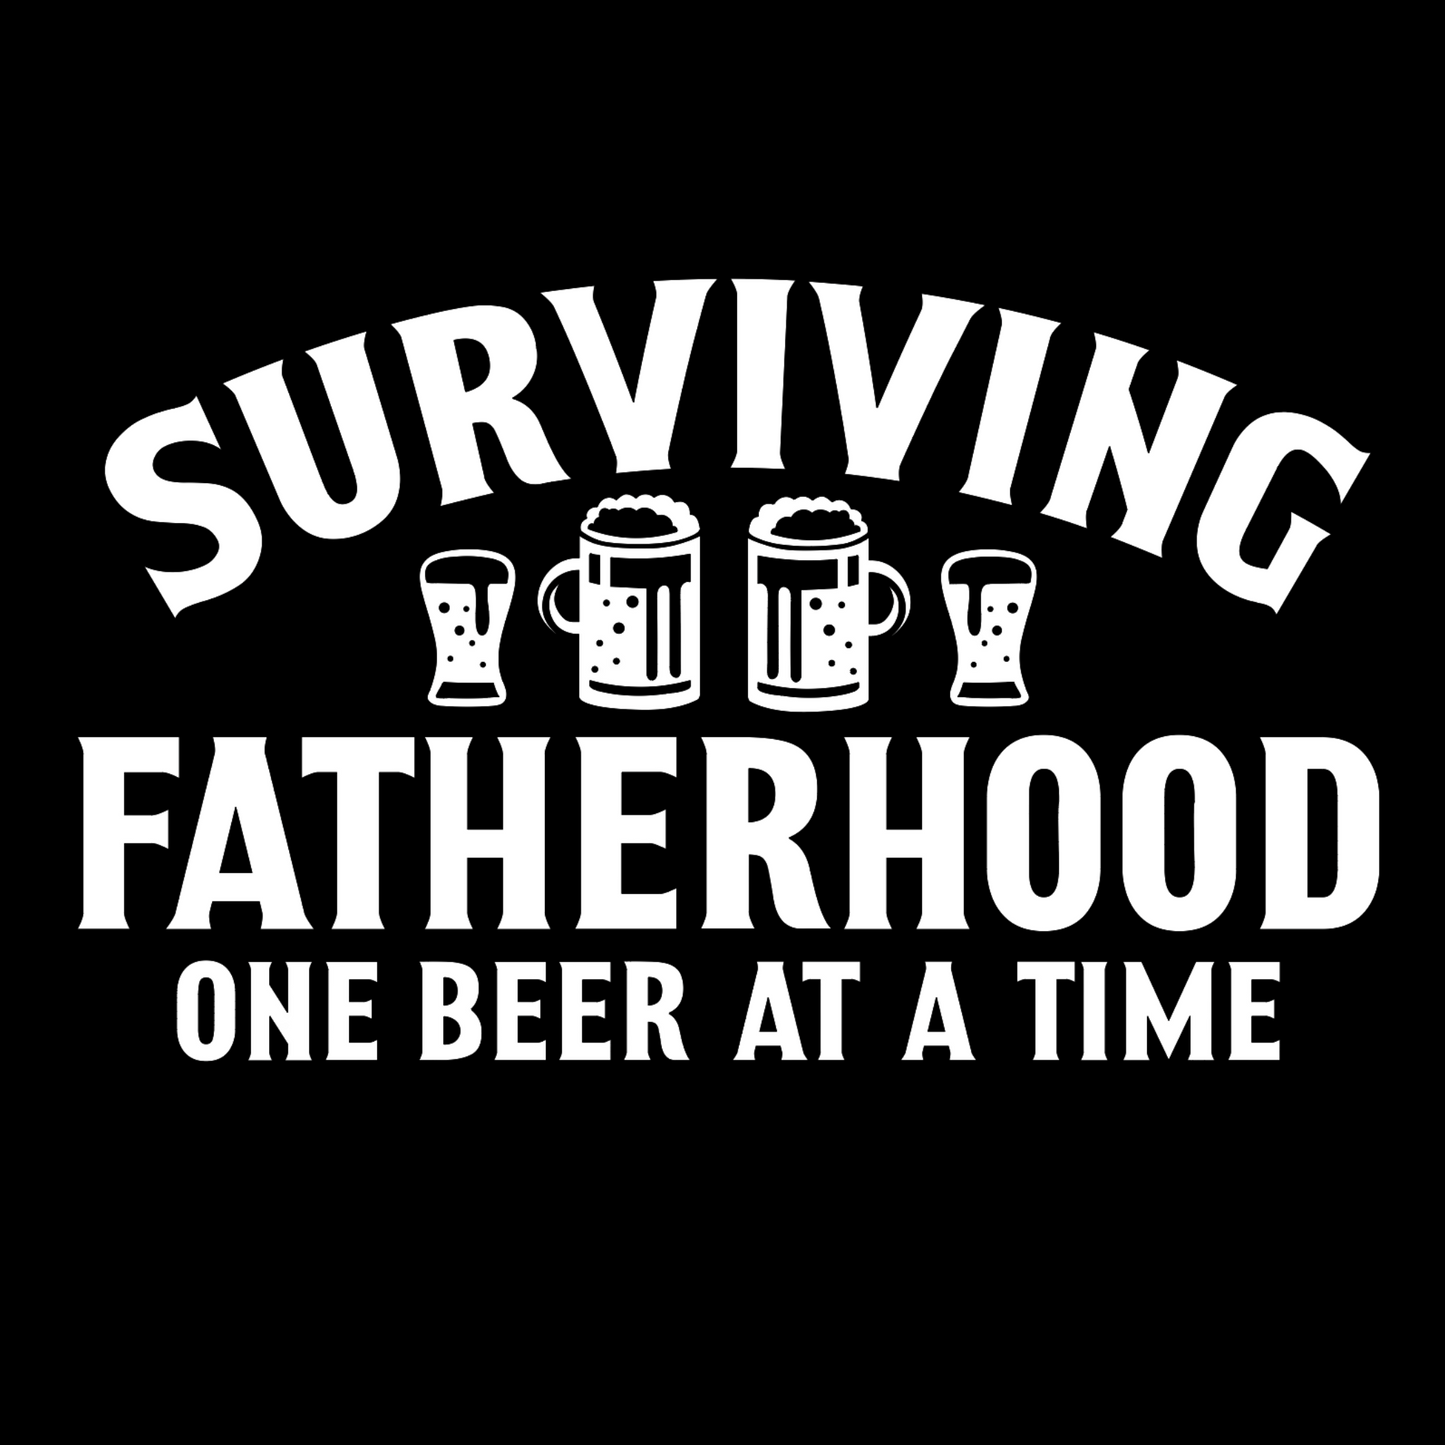 Surviving Fatherhood One Beer At A Time - Black T-Shirt - front view in white writing. Between the word surviving and fatherhood is different glasses of beer mugs. This is an unclose image of the design in a white on a black background.